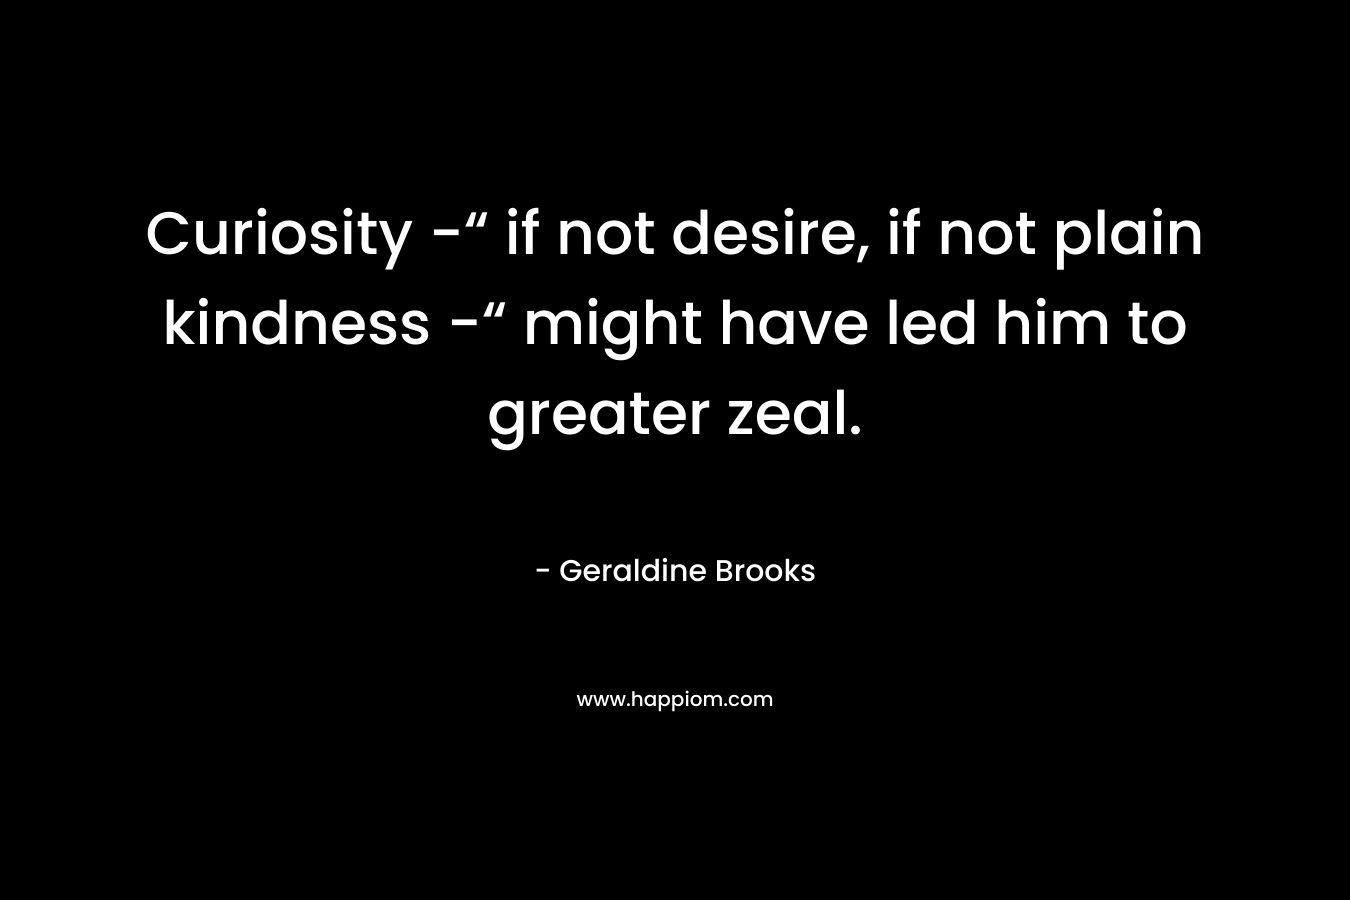 Curiosity -“ if not desire, if not plain kindness -“ might have led him to greater zeal.